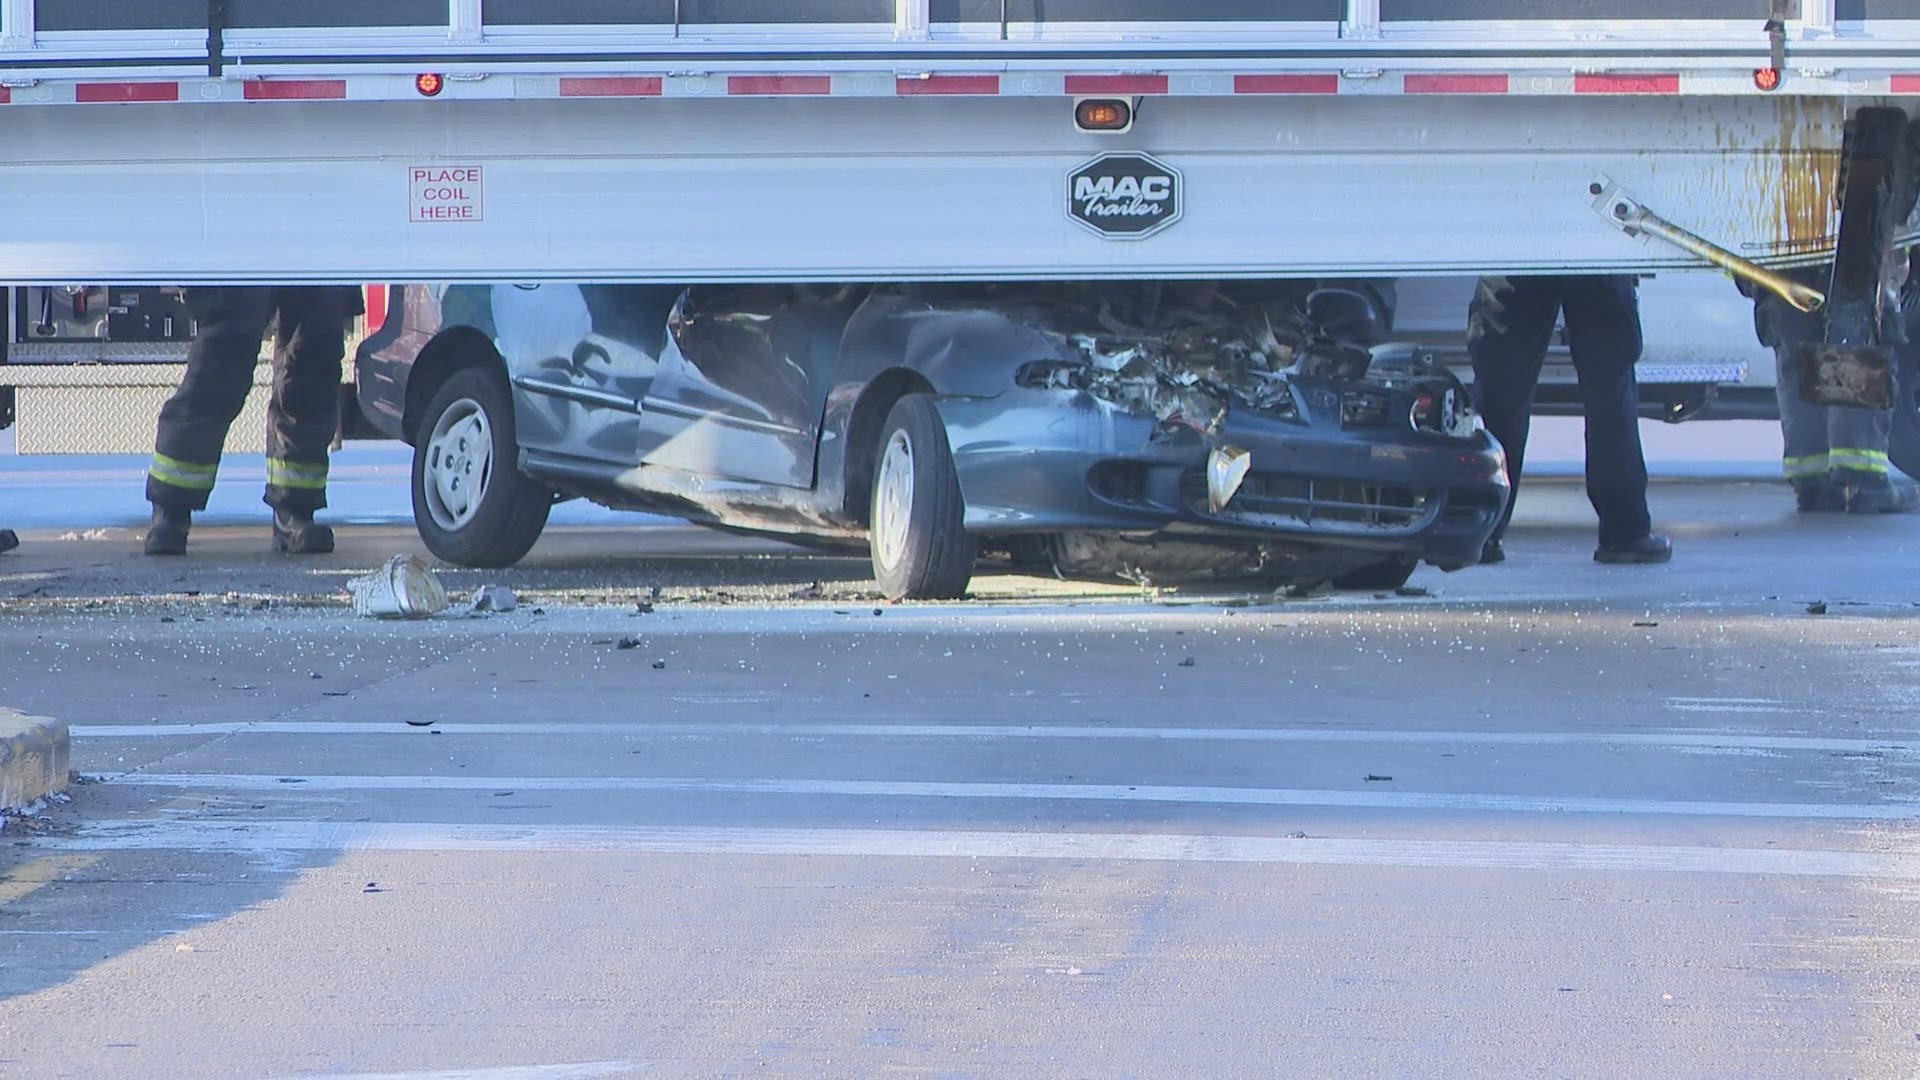 The Ohio State Highway Patrol says Michael S. Yearout of Cleveland failed to stop at a red light, striking the side of the semi. He was pronounced dead at the scene.